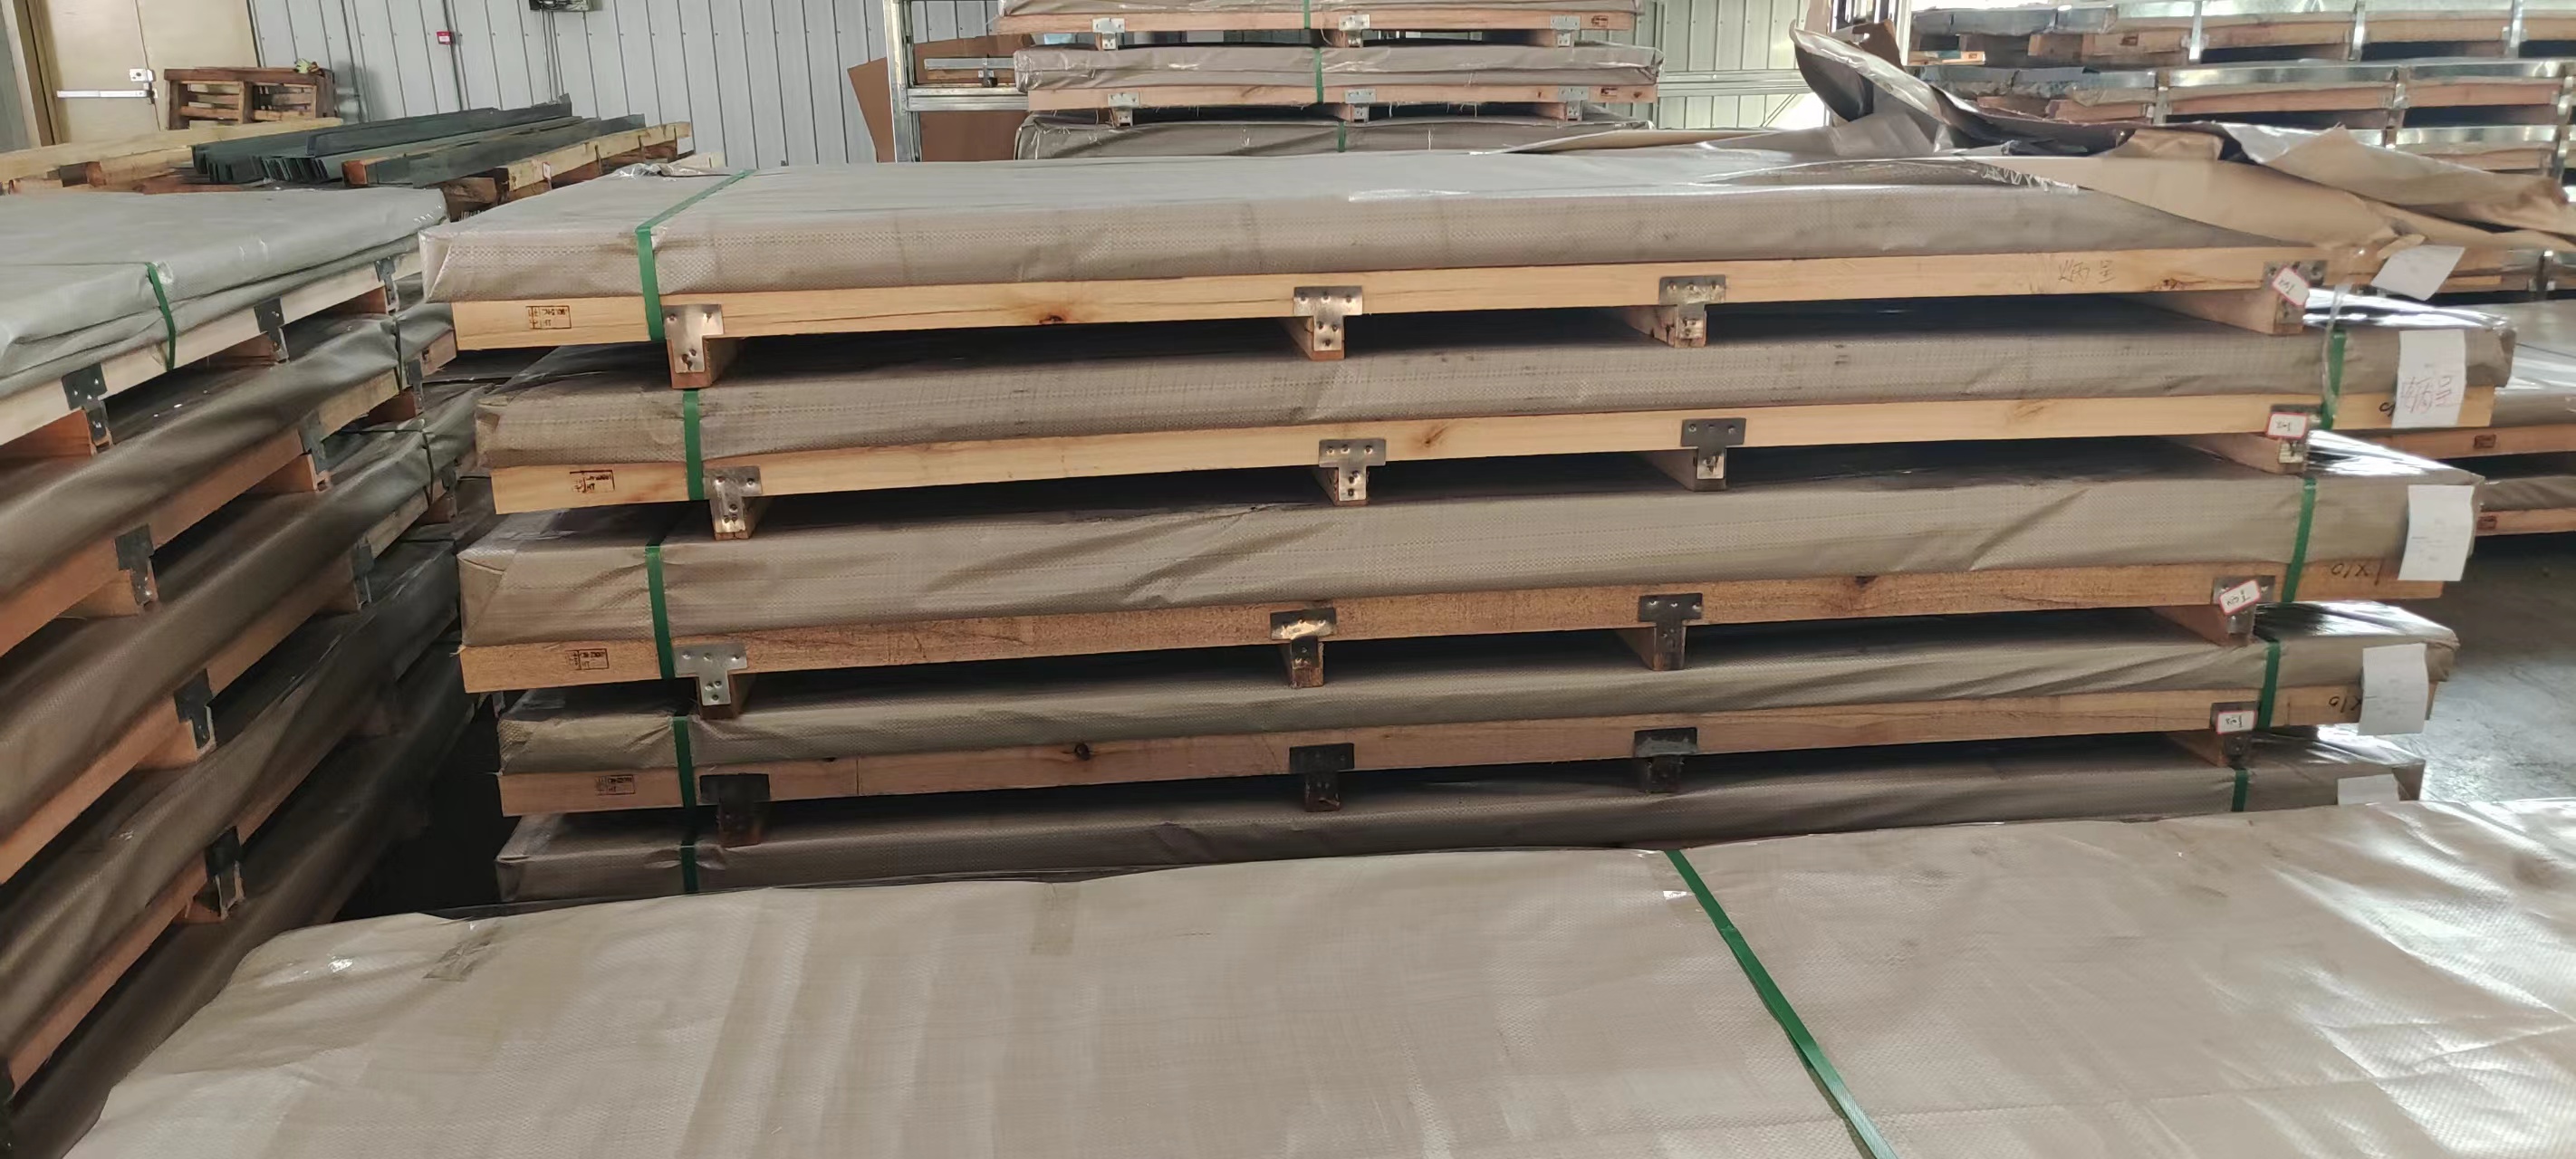 HUNAN GREAT STEEL PIPE CO.,LTD FINISHED THE ORDER OF STAINLESS STEEL PLATES